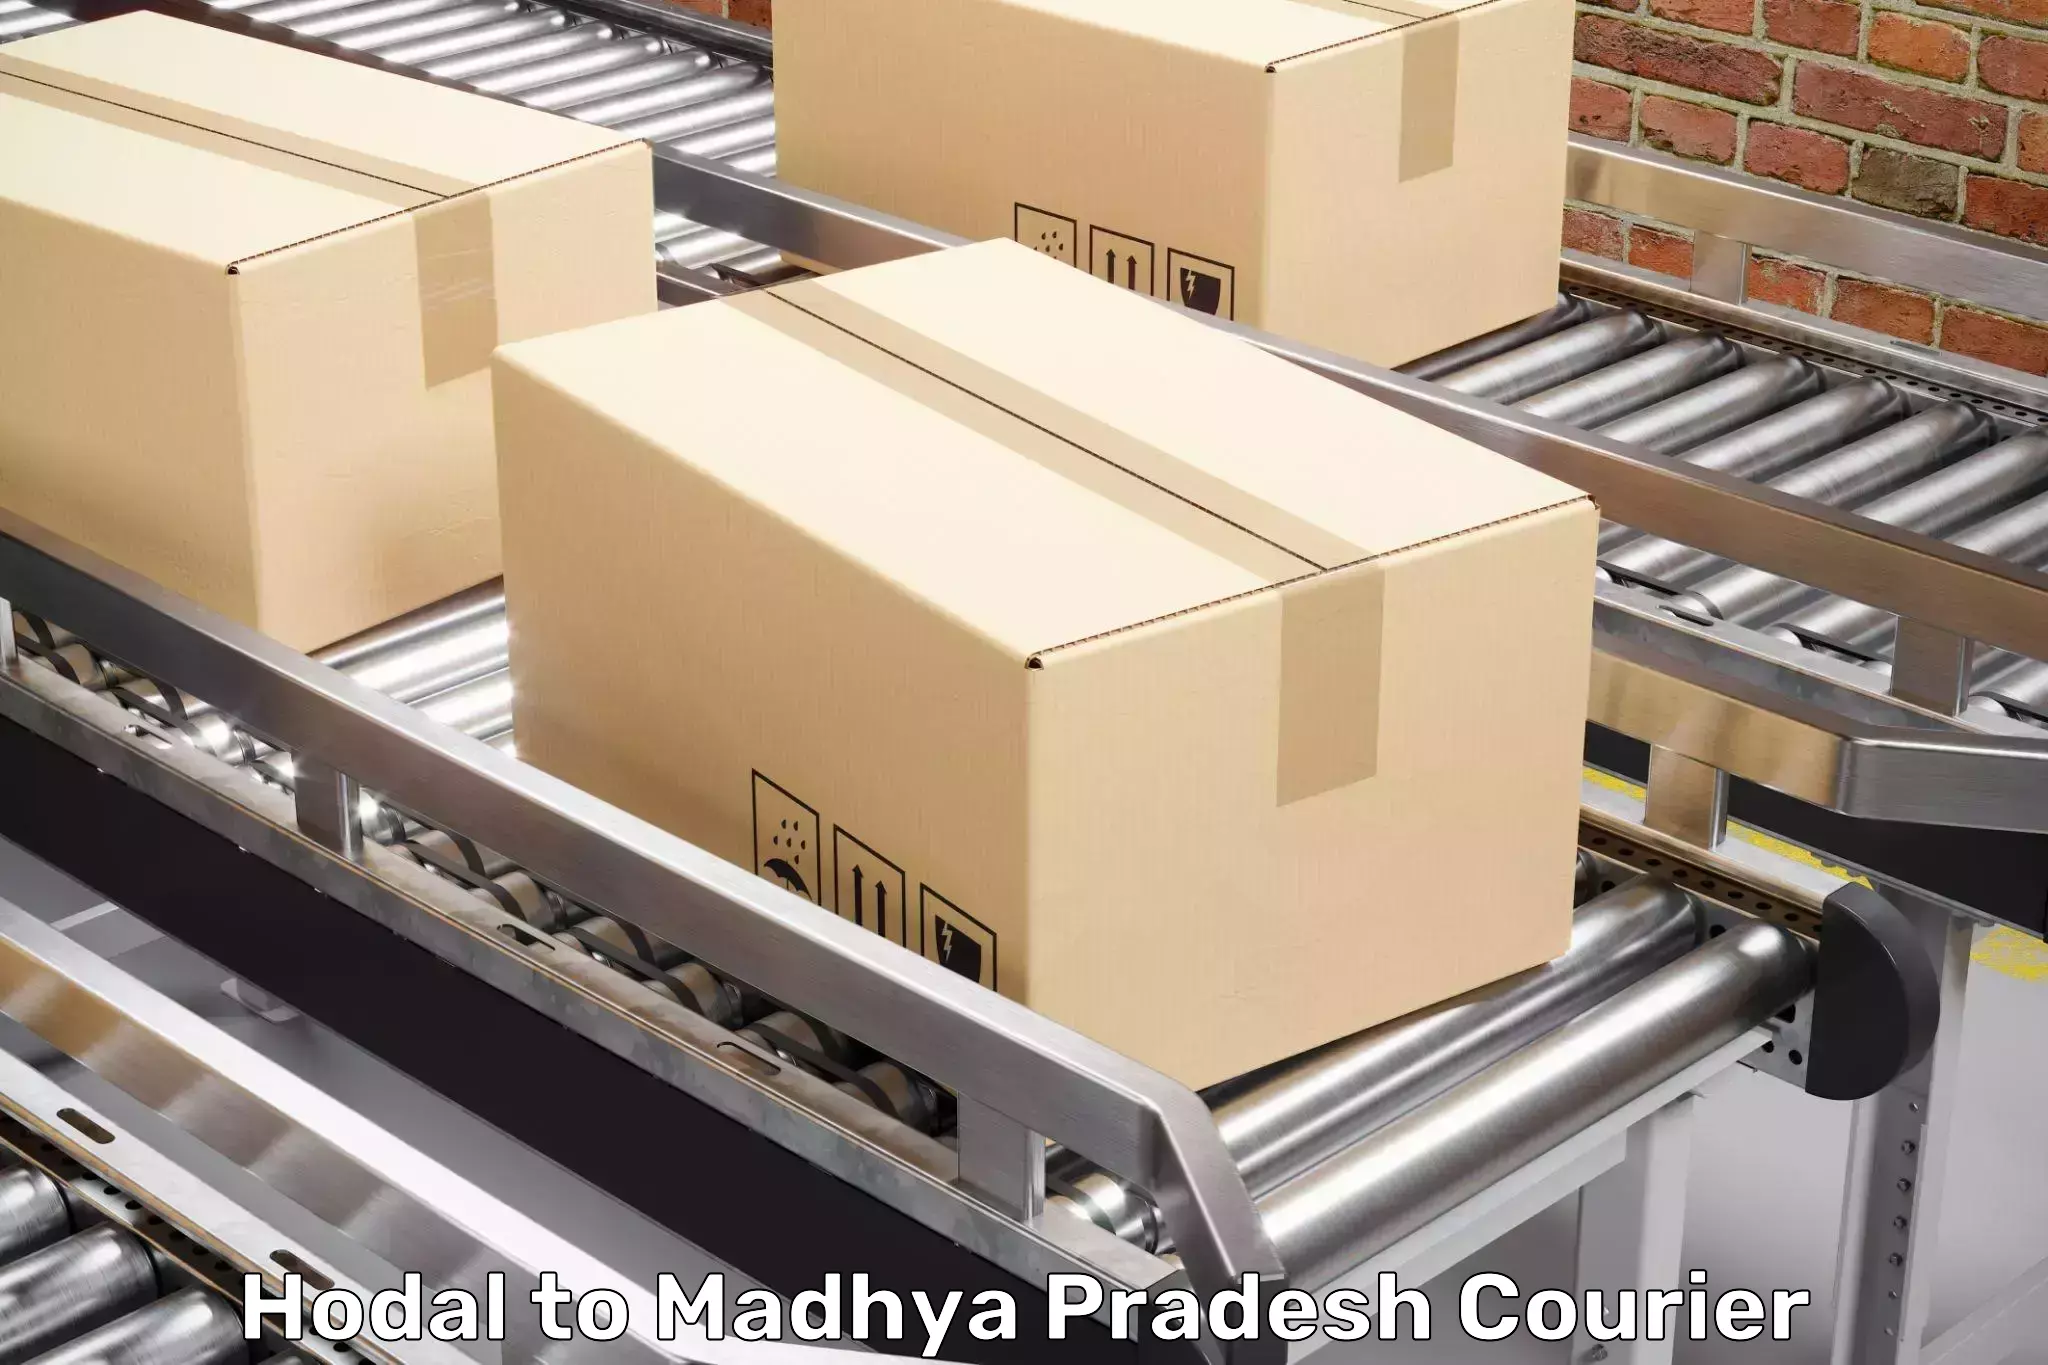 Efficient relocation services Hodal to Niwari